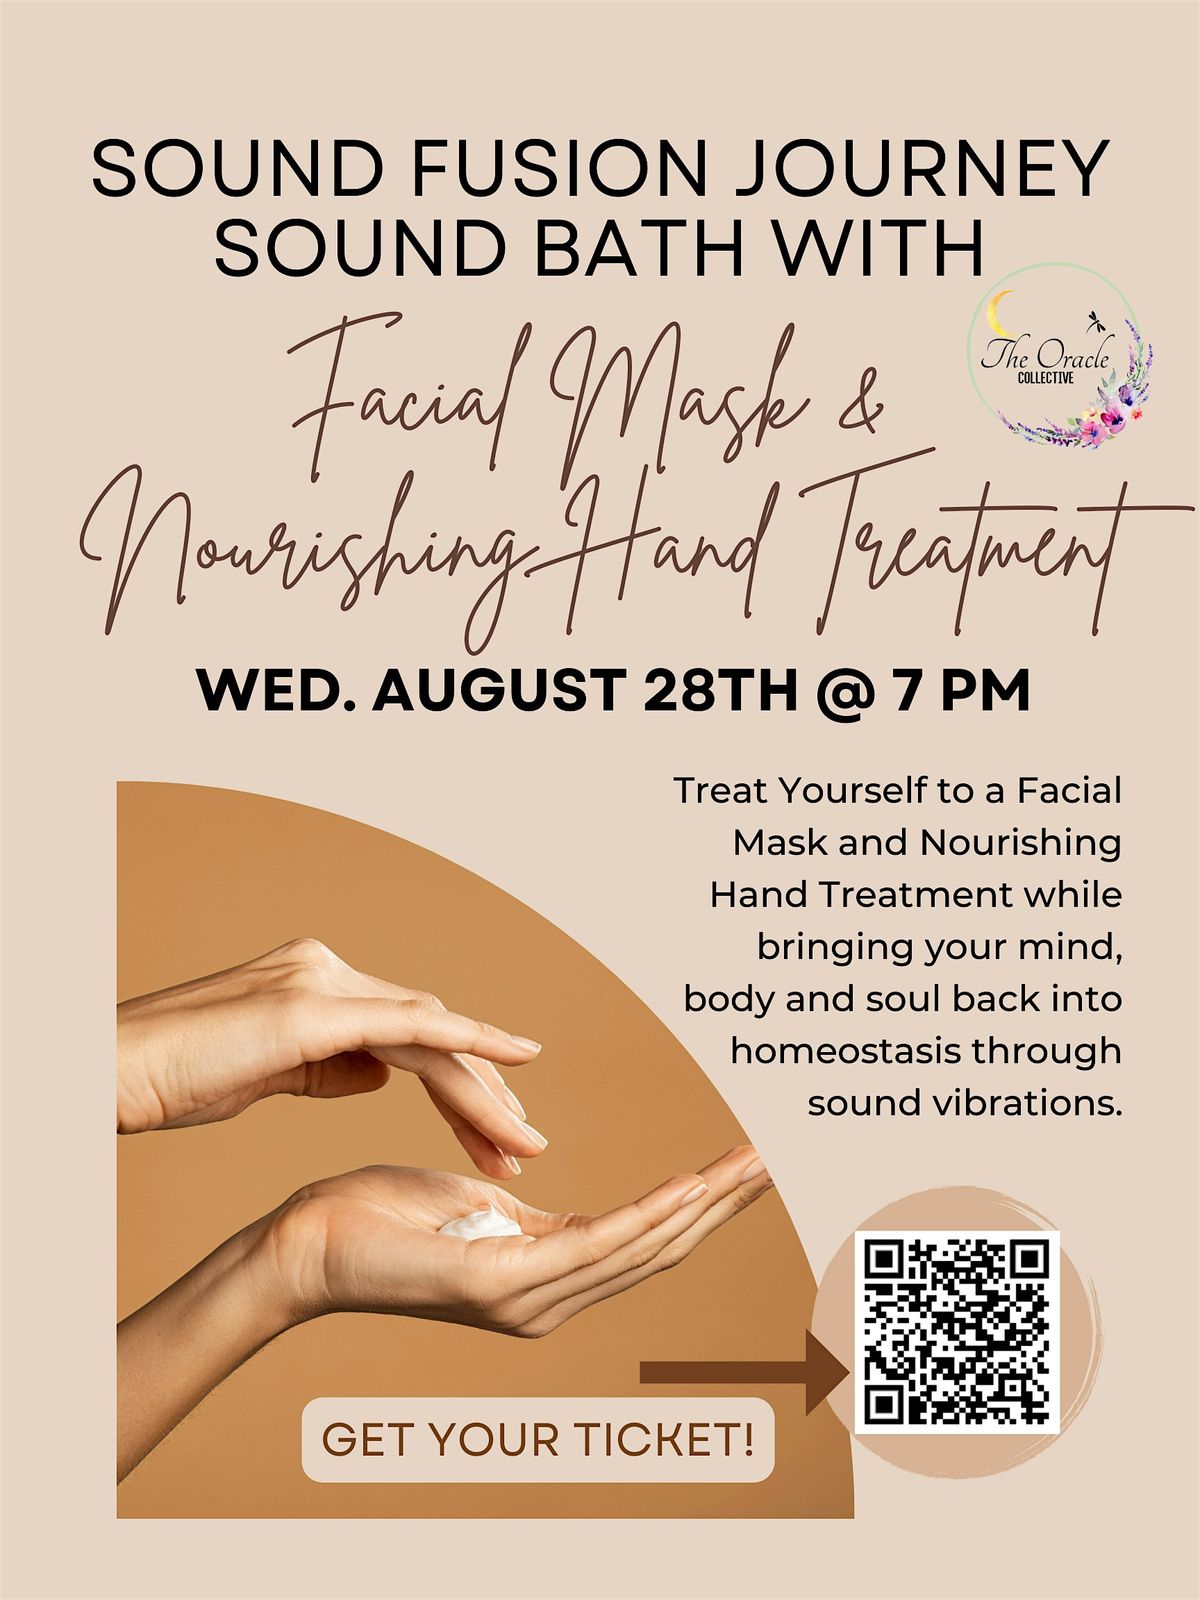 Sound Fusion Journey with Facial Mask & Nourishing Hand Treatment